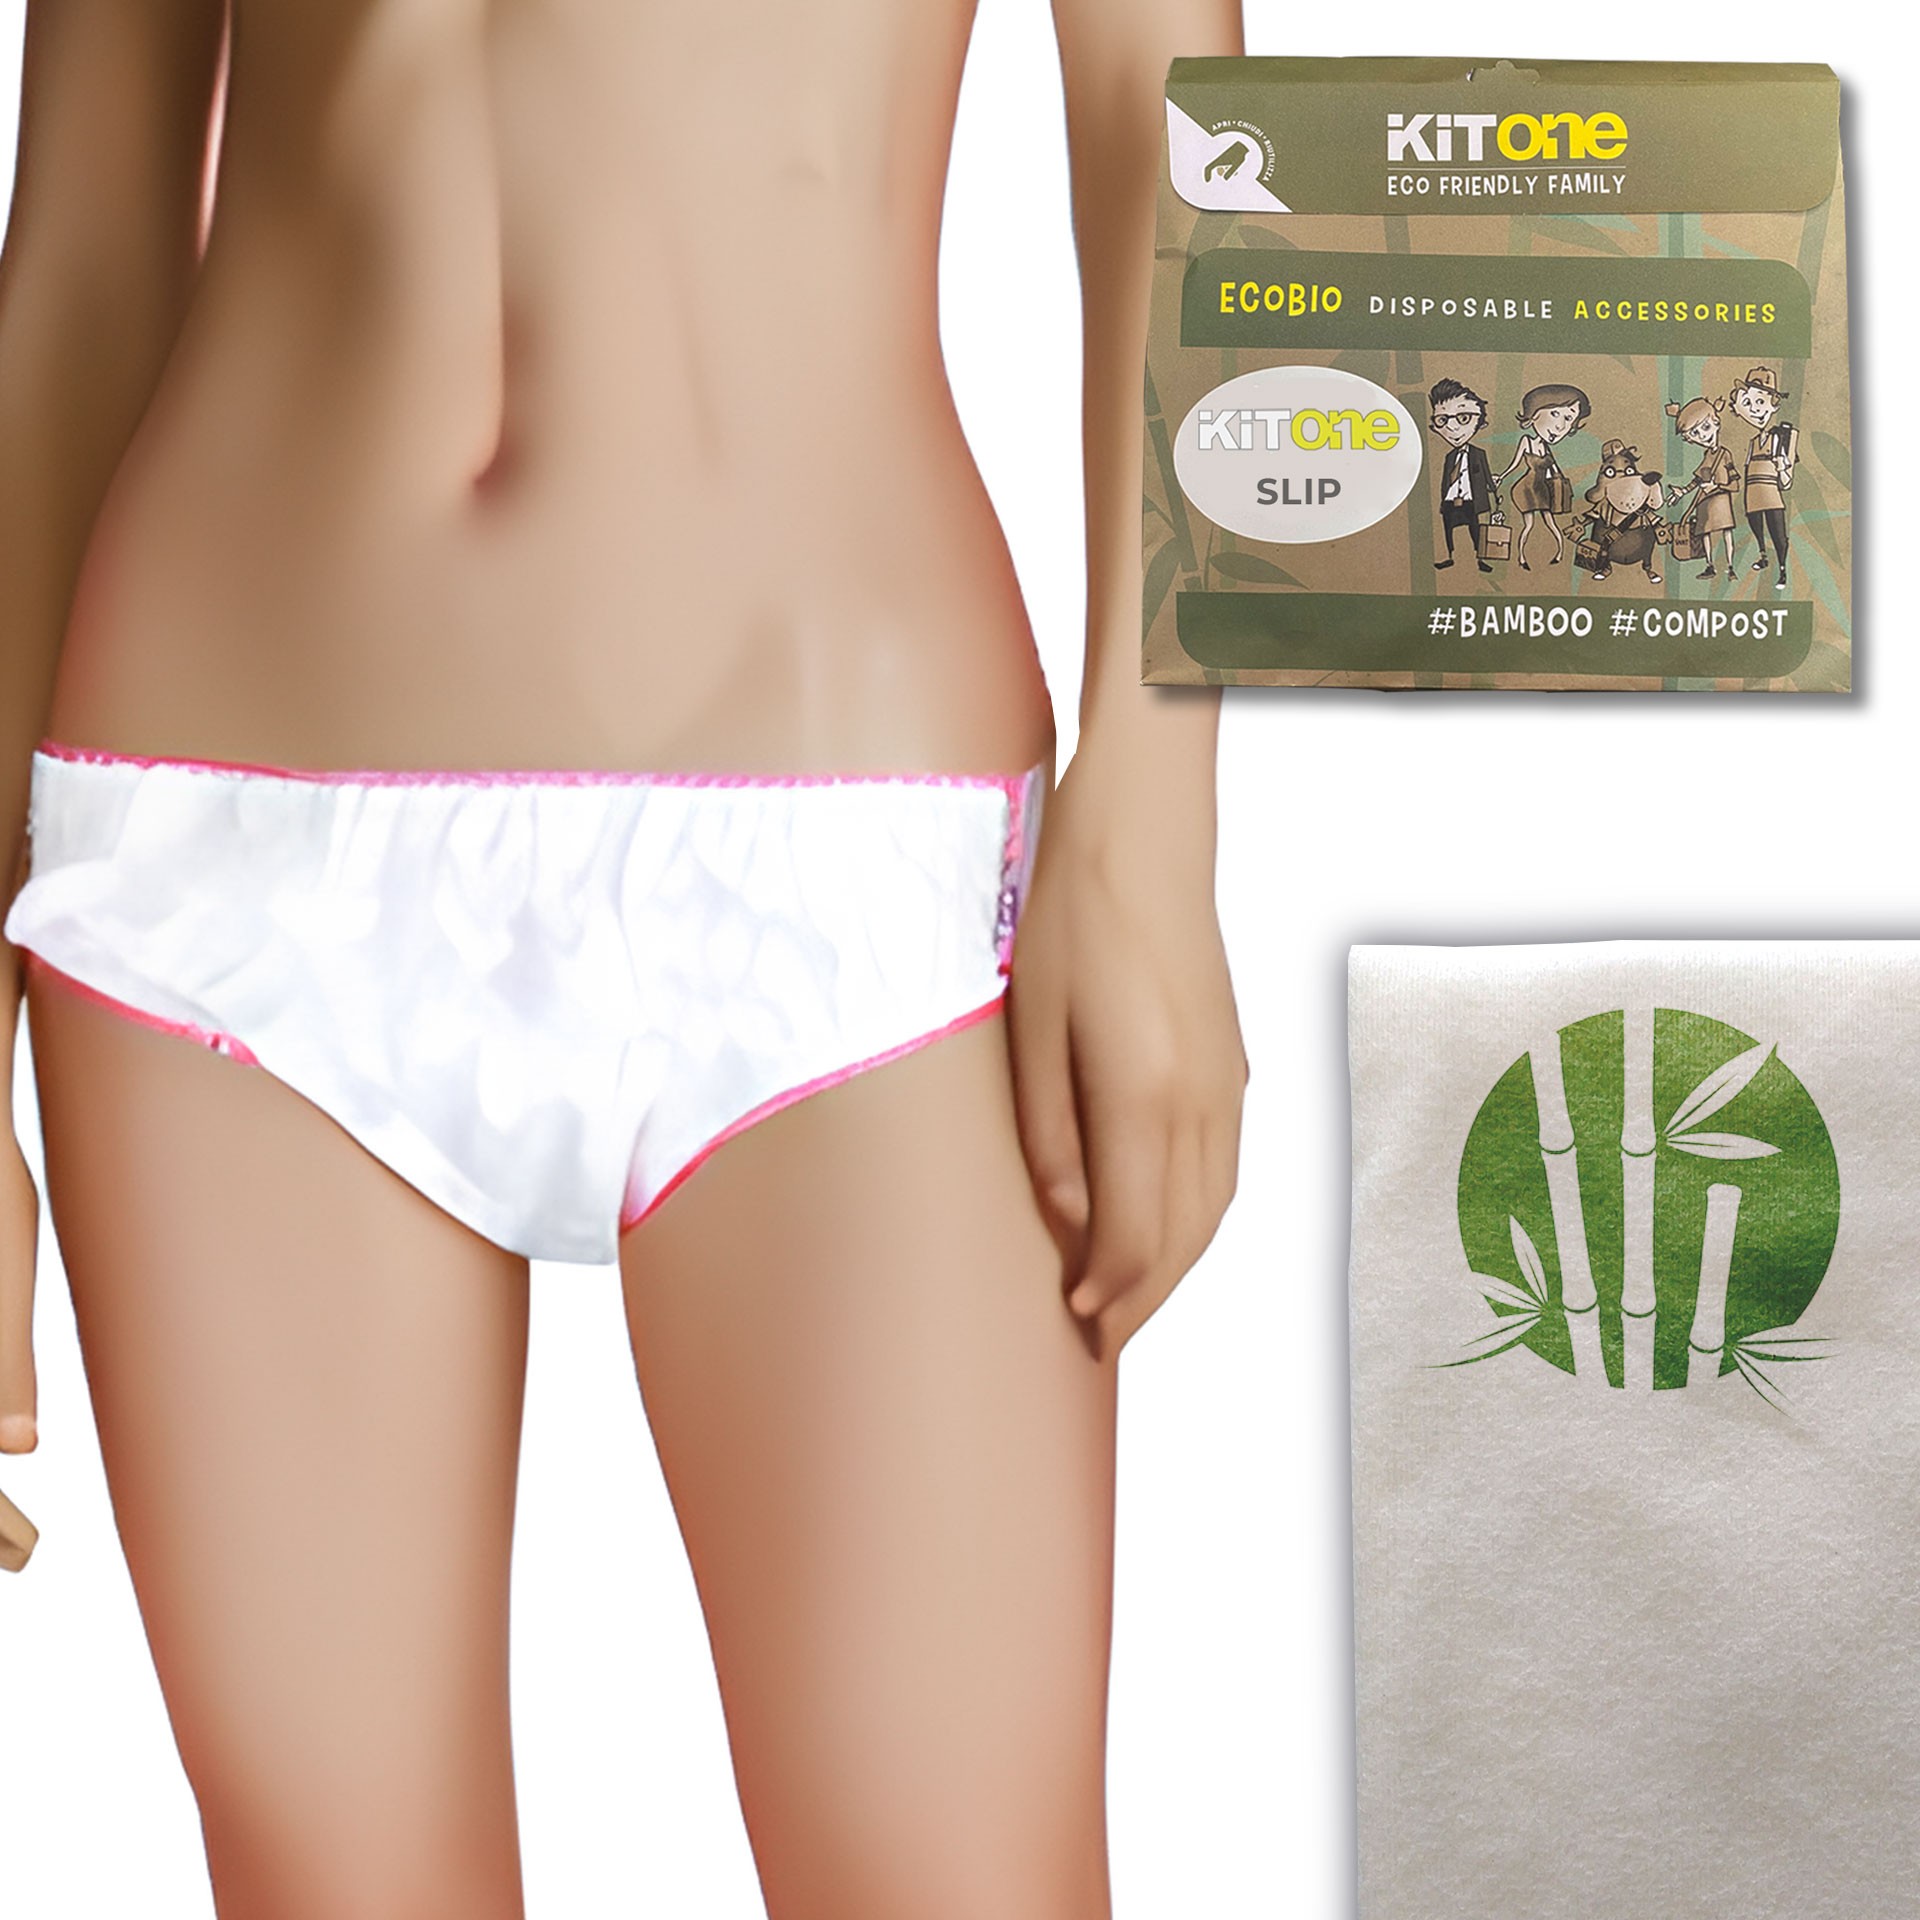 20 WOMEN'S Eco-Bio Disposable Briefs in comfortable and practical